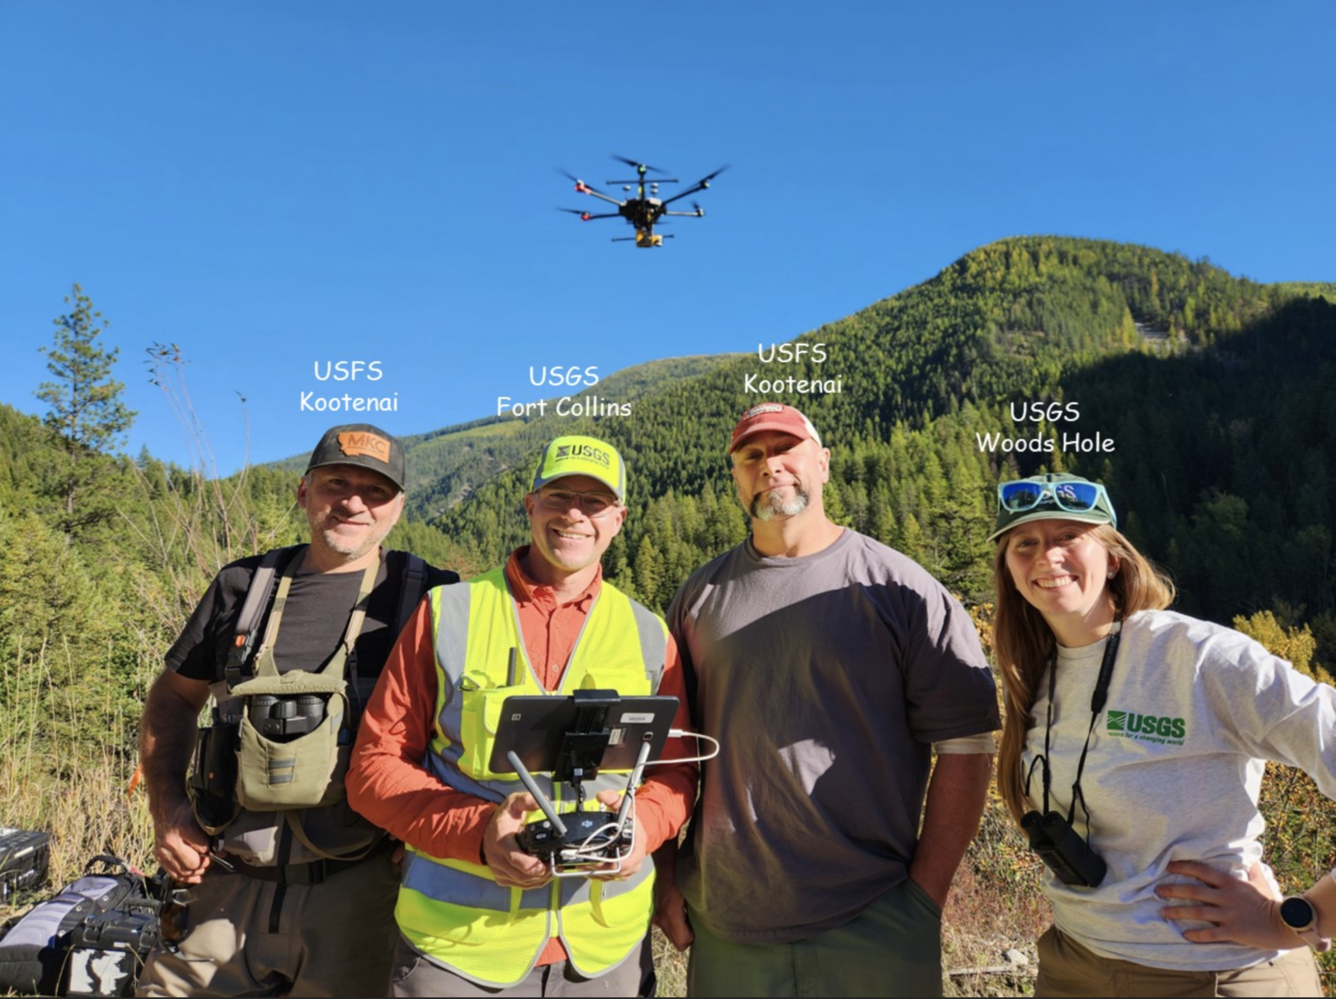 Four people smiling, drone flying overhead